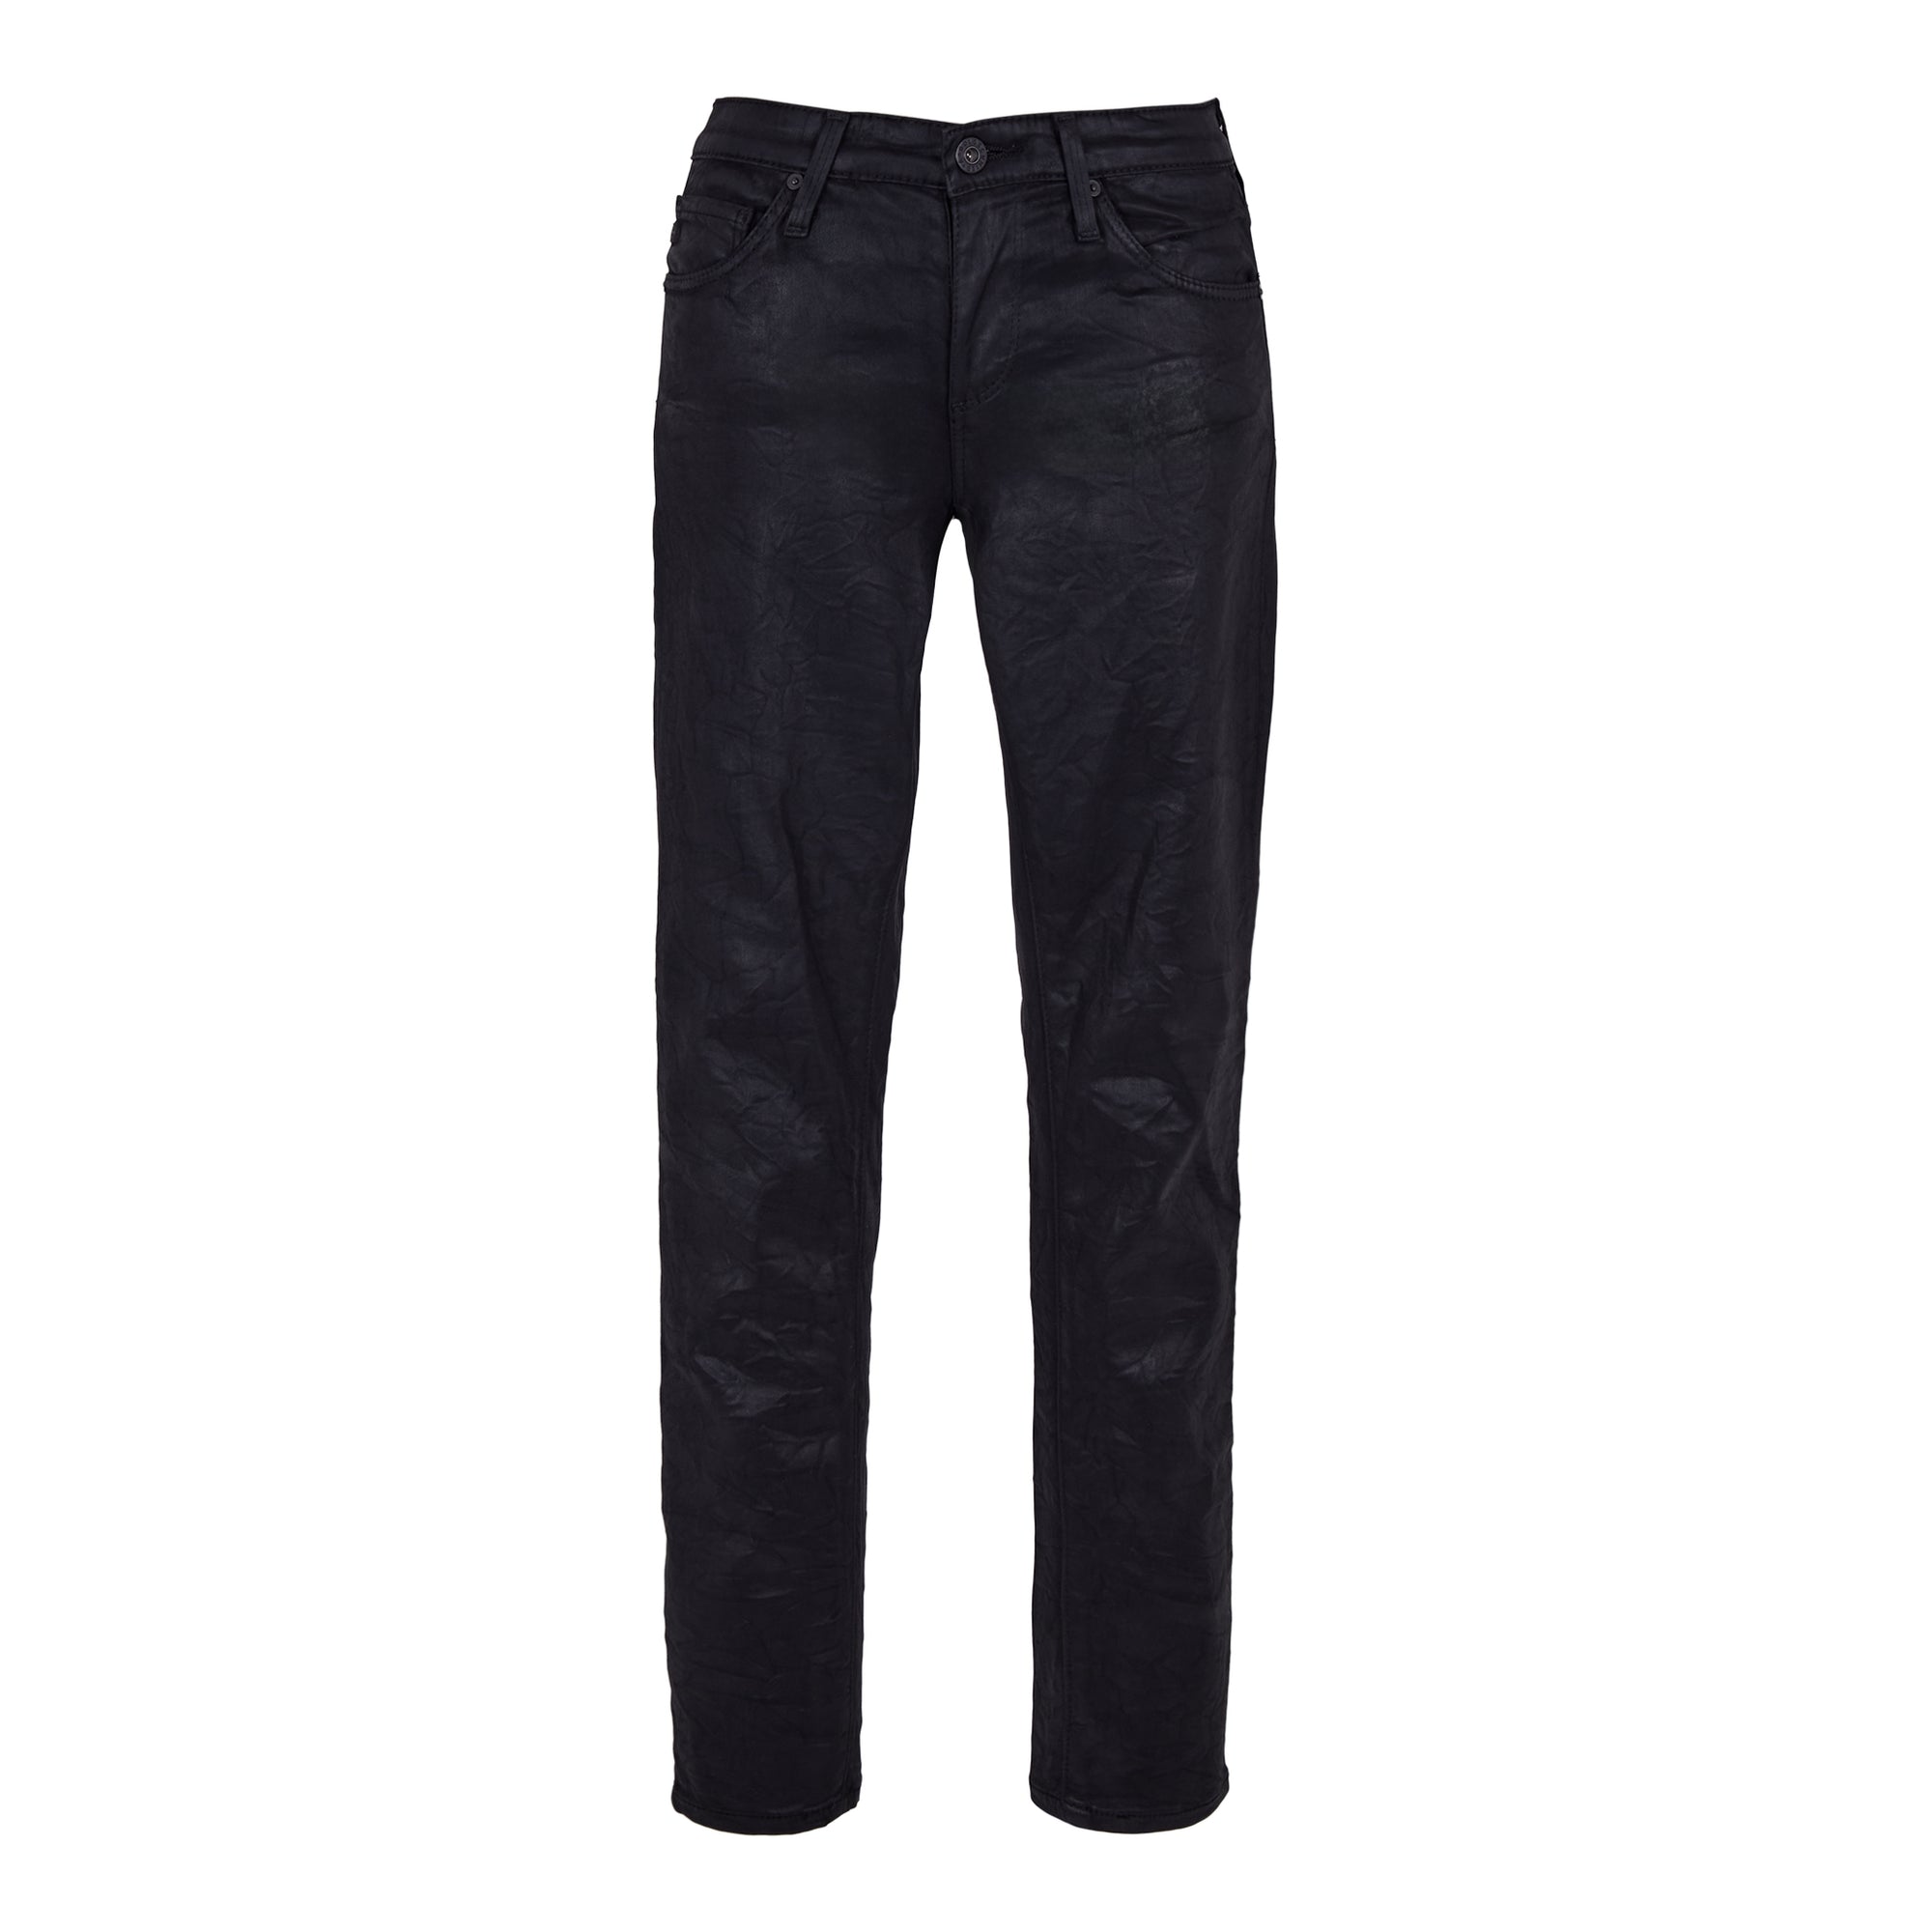 Adriano Goldschmed Super skinny black style pants